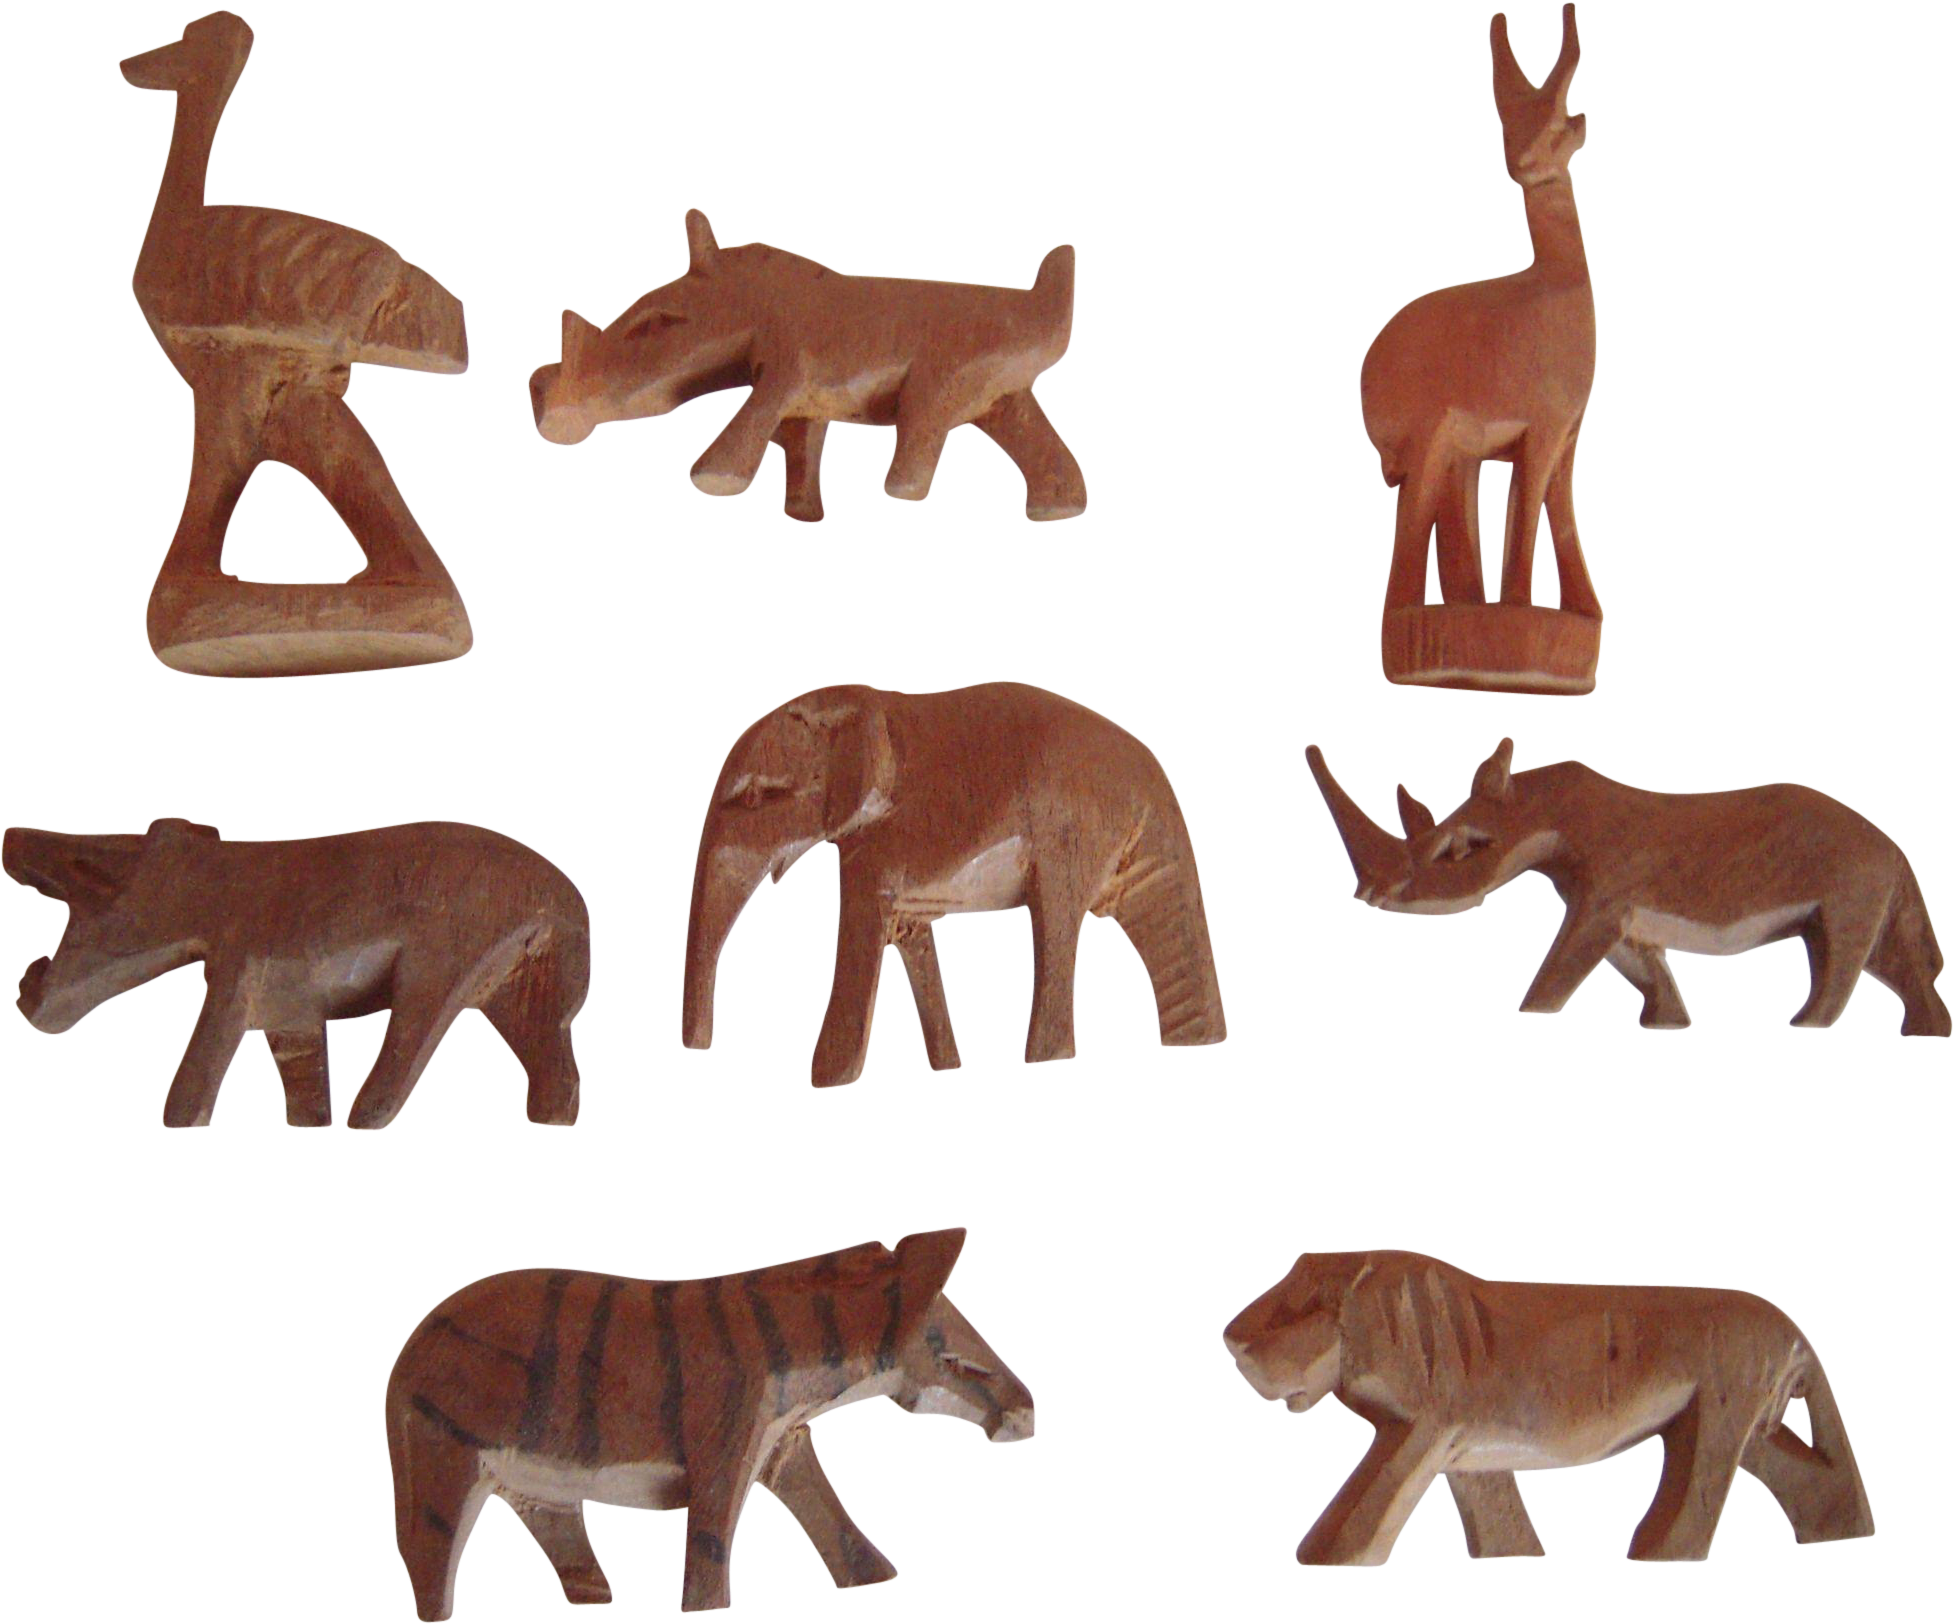 Lot Of 8 Vintage Toy Miniature Hand Carved Wooden Animals - Antique Carved Toy Animal (1952x1952)